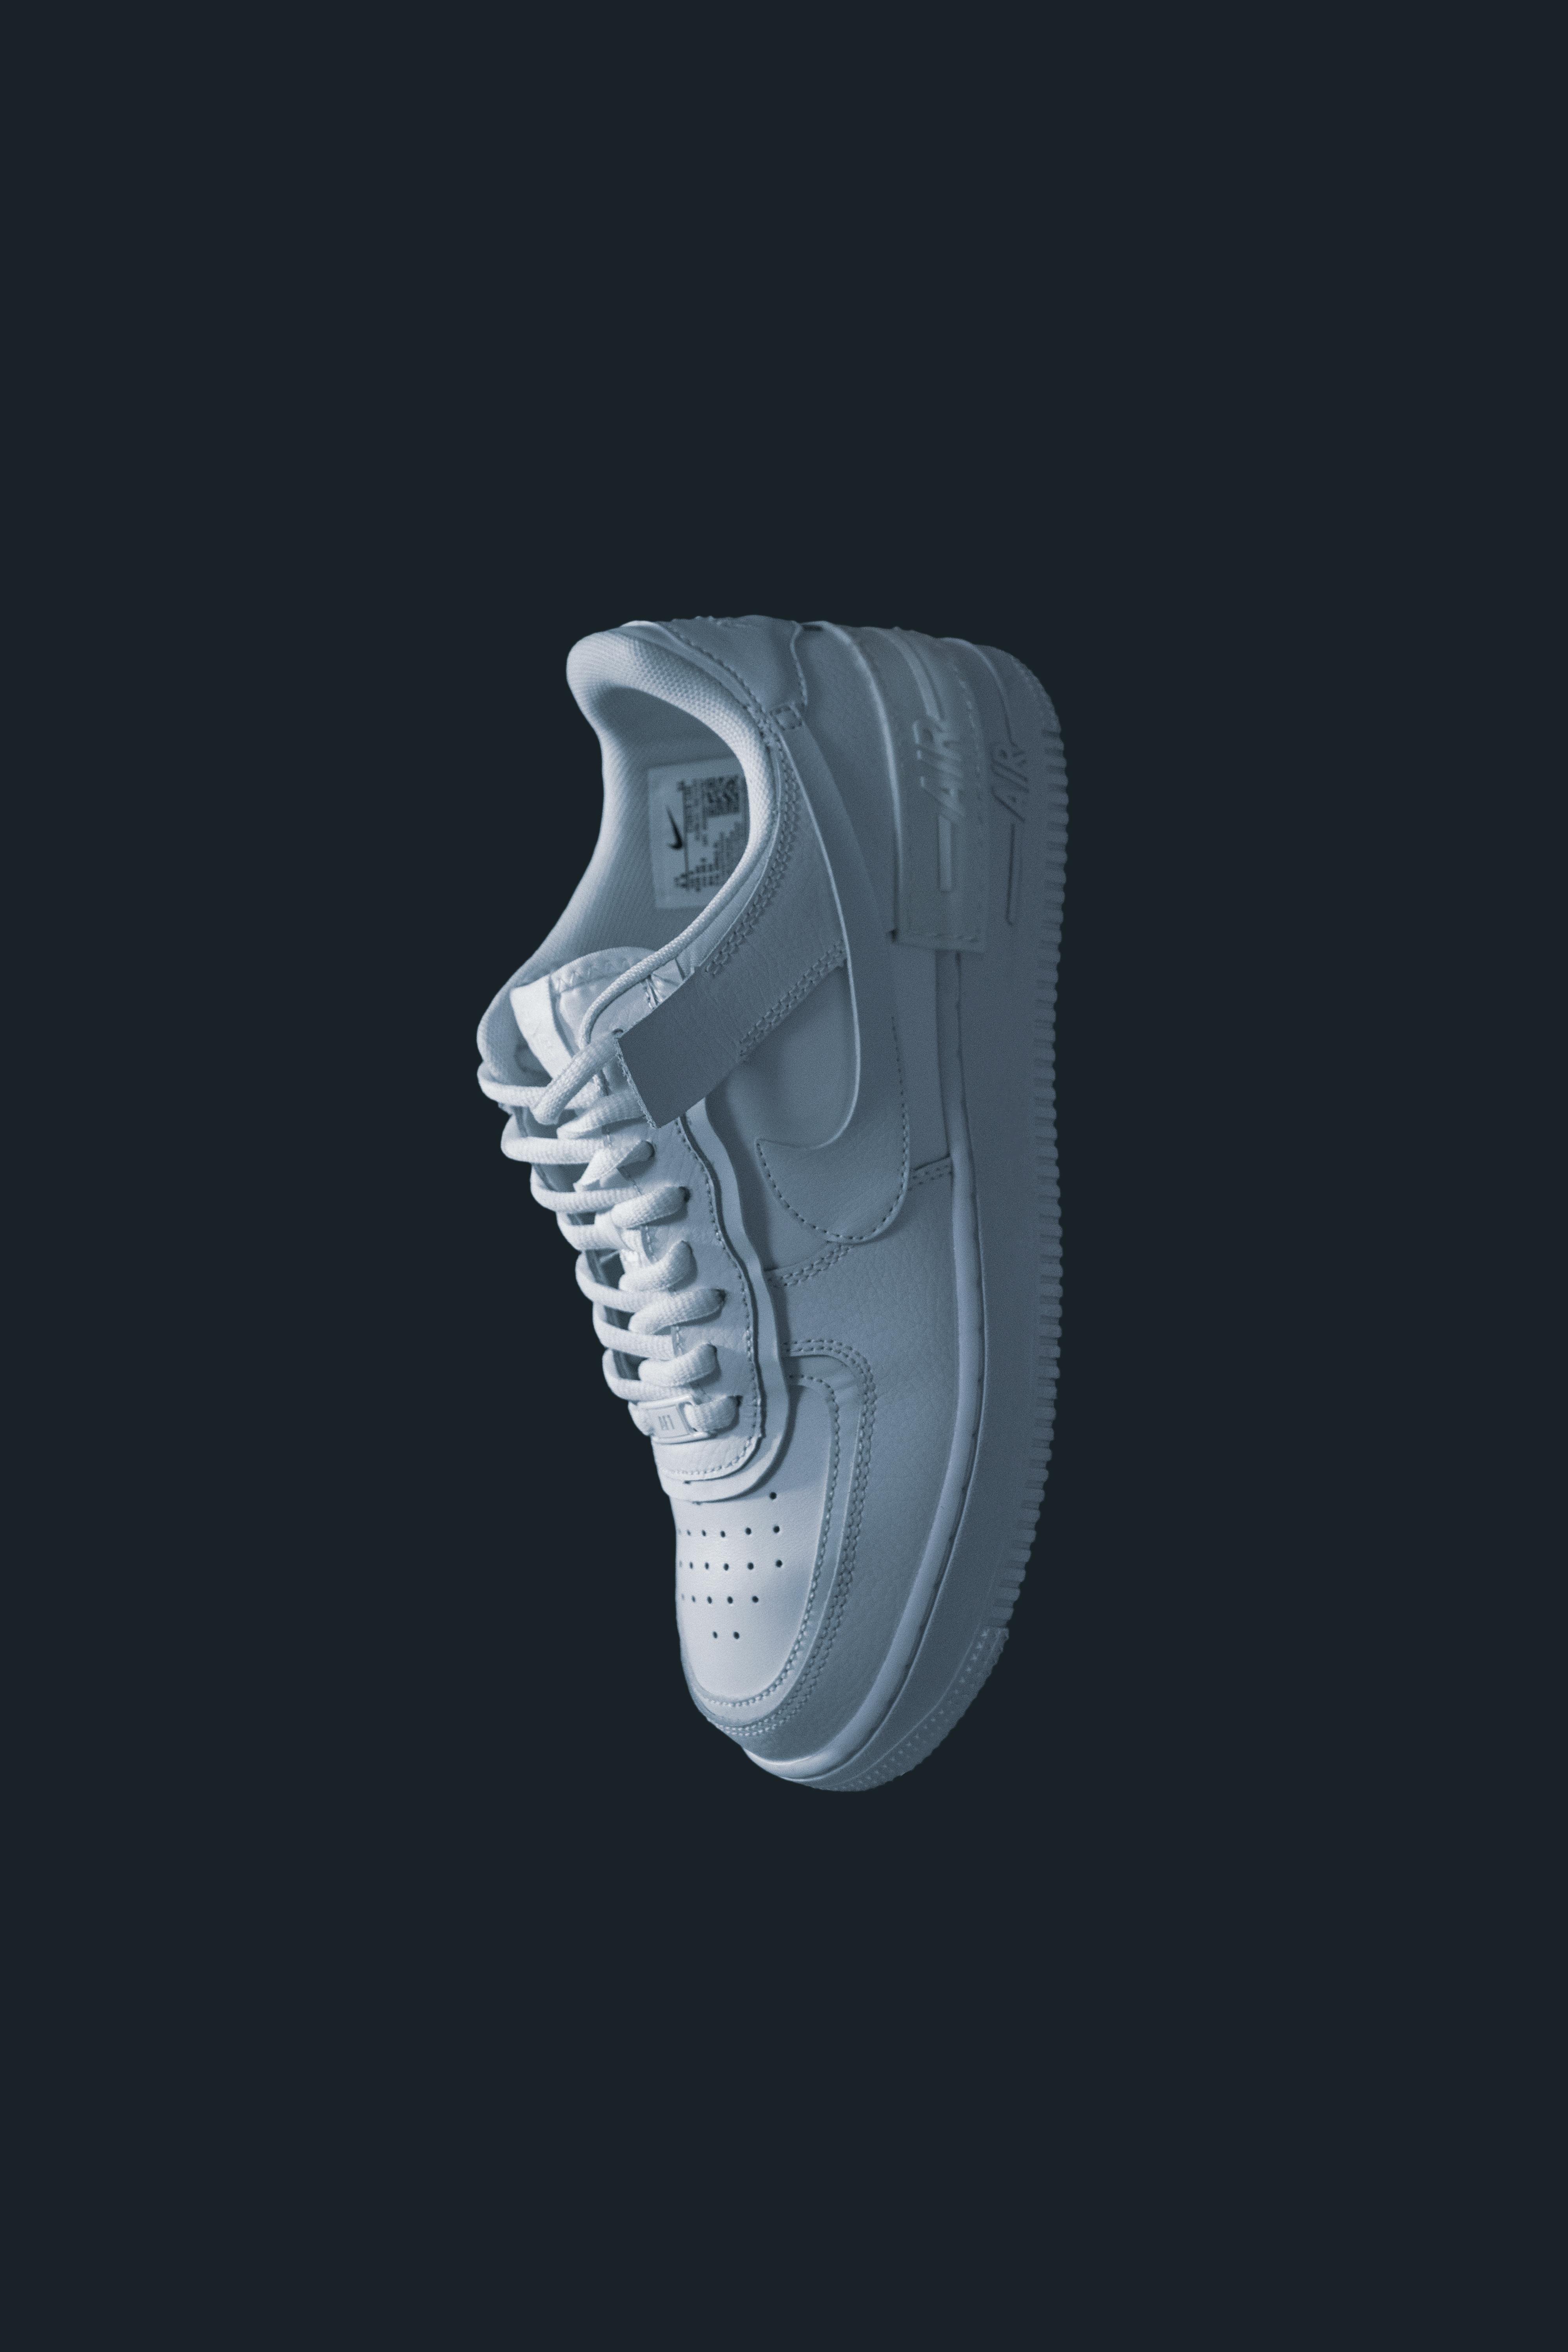 Person standing wearing brown and black Nike Air Force 1 photo – Free Grey  Image on Unsplash